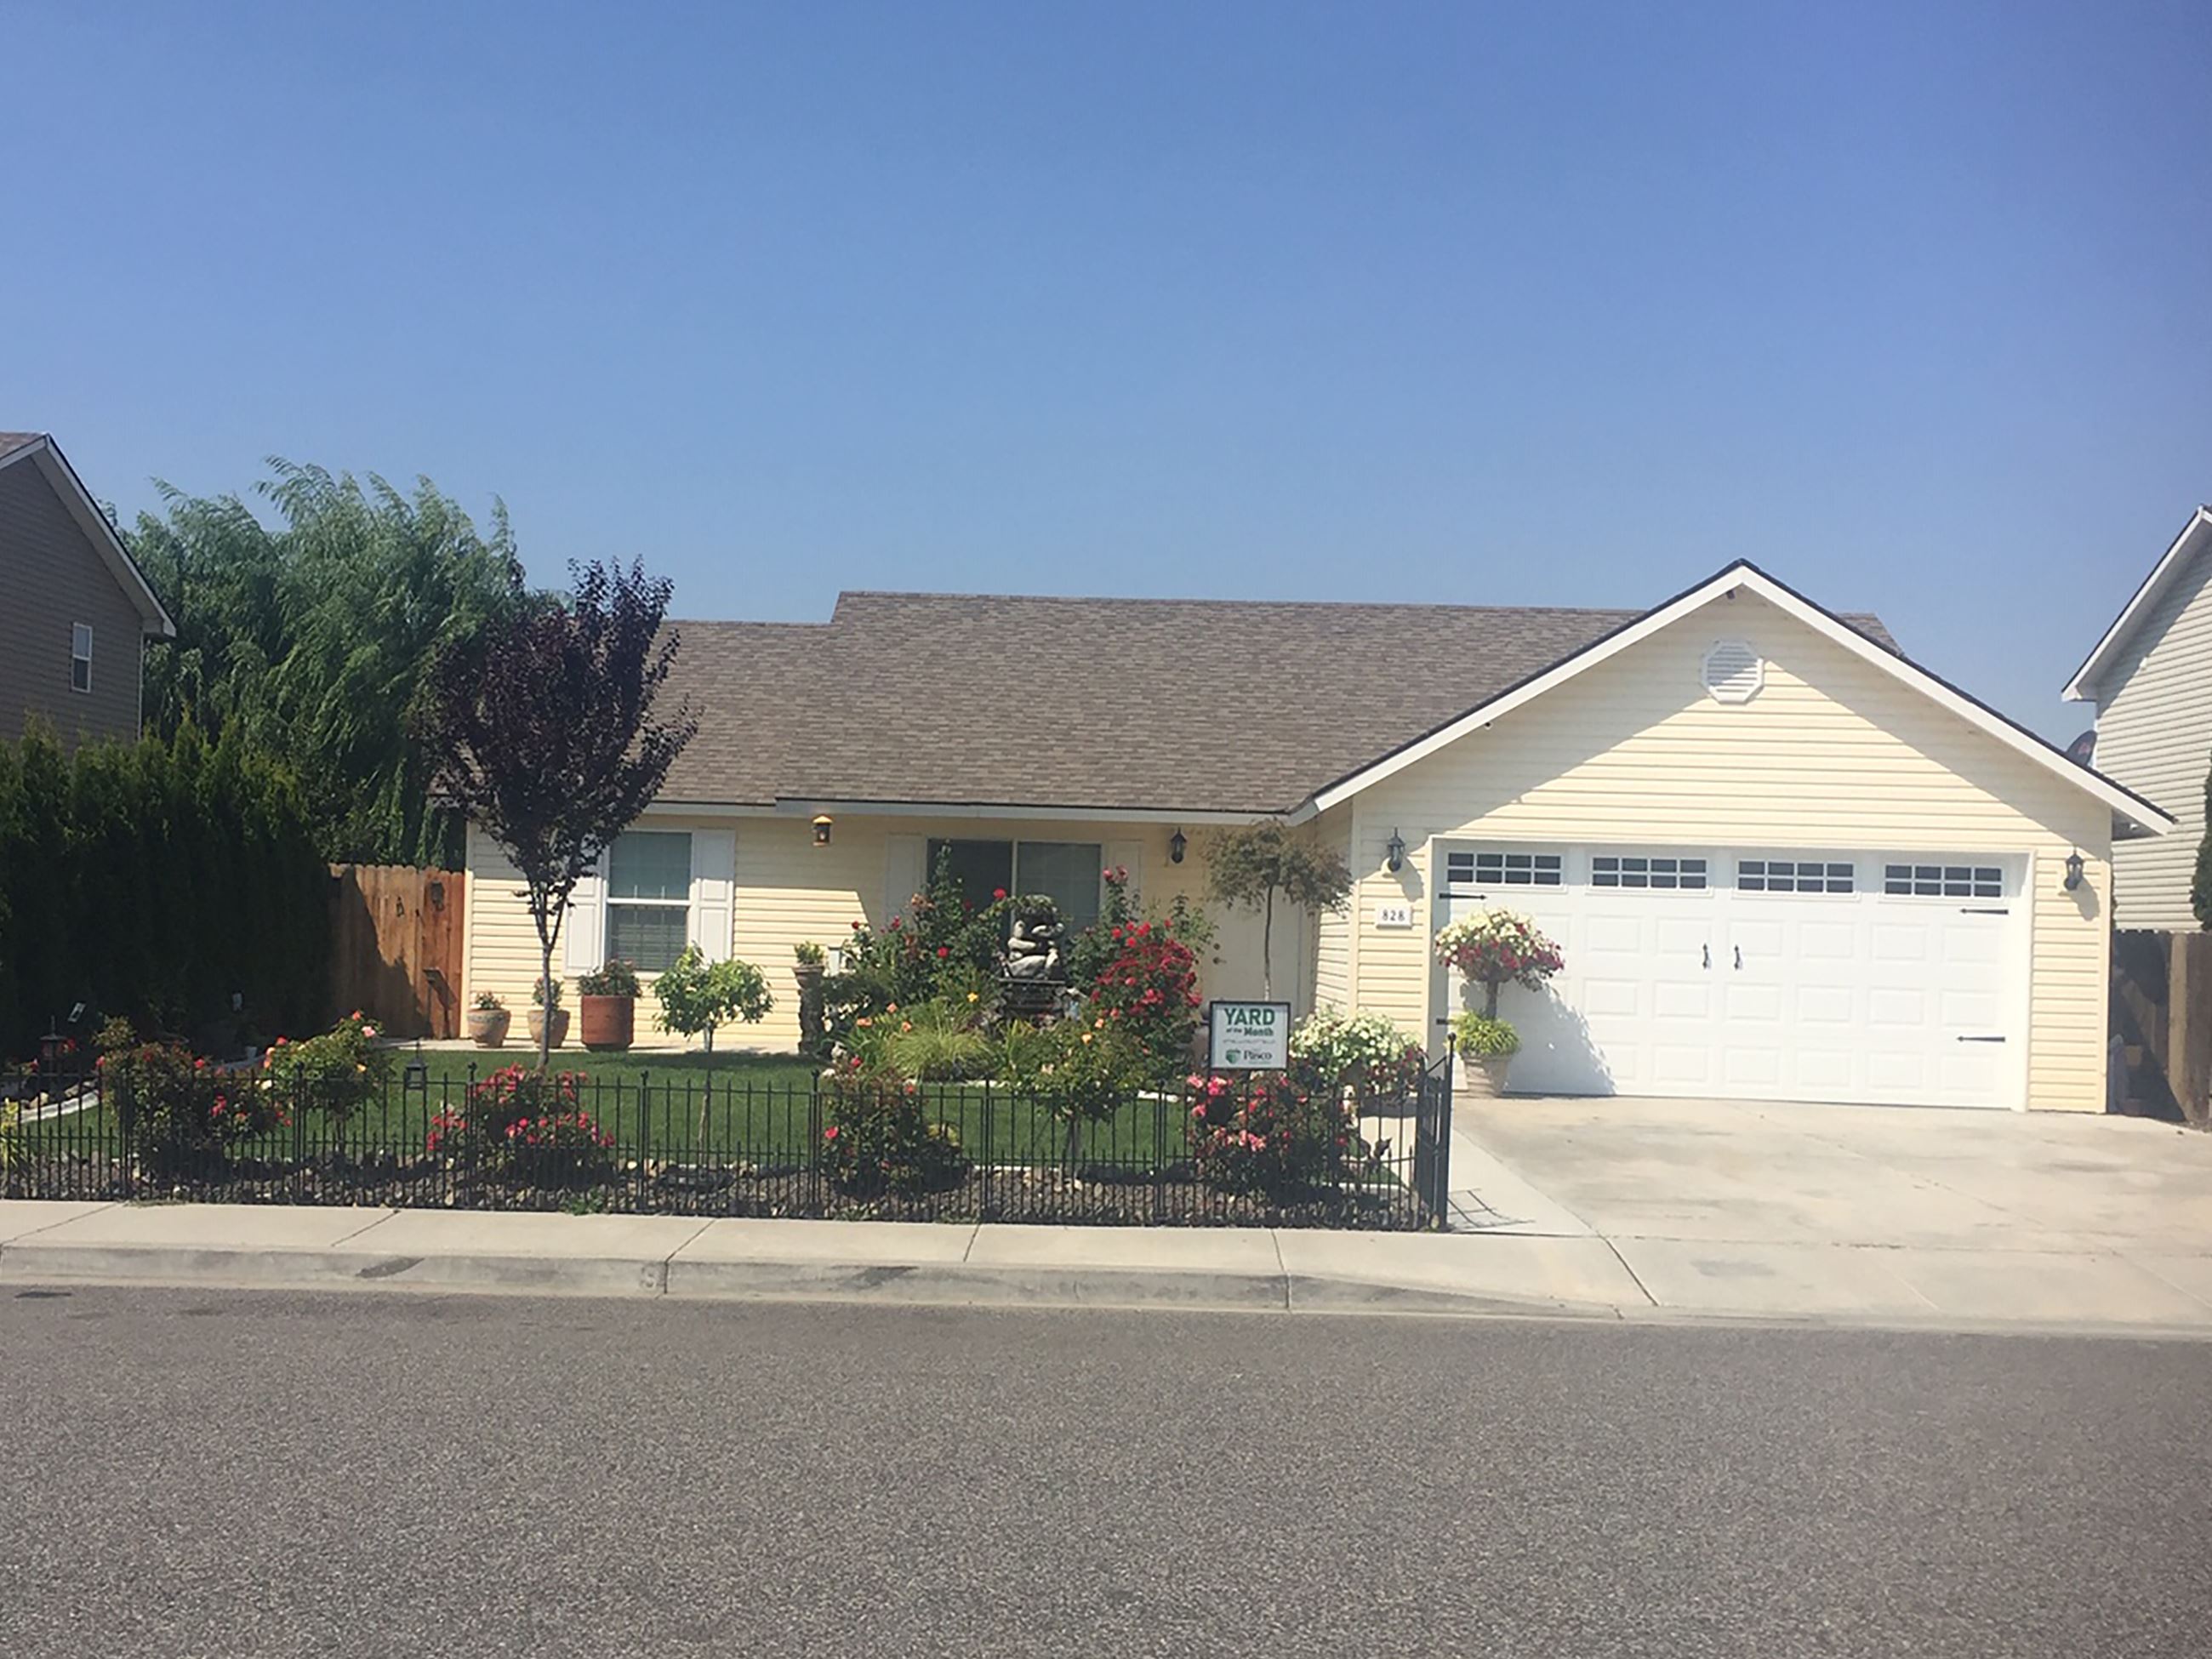 July 2019 Yard of the Month